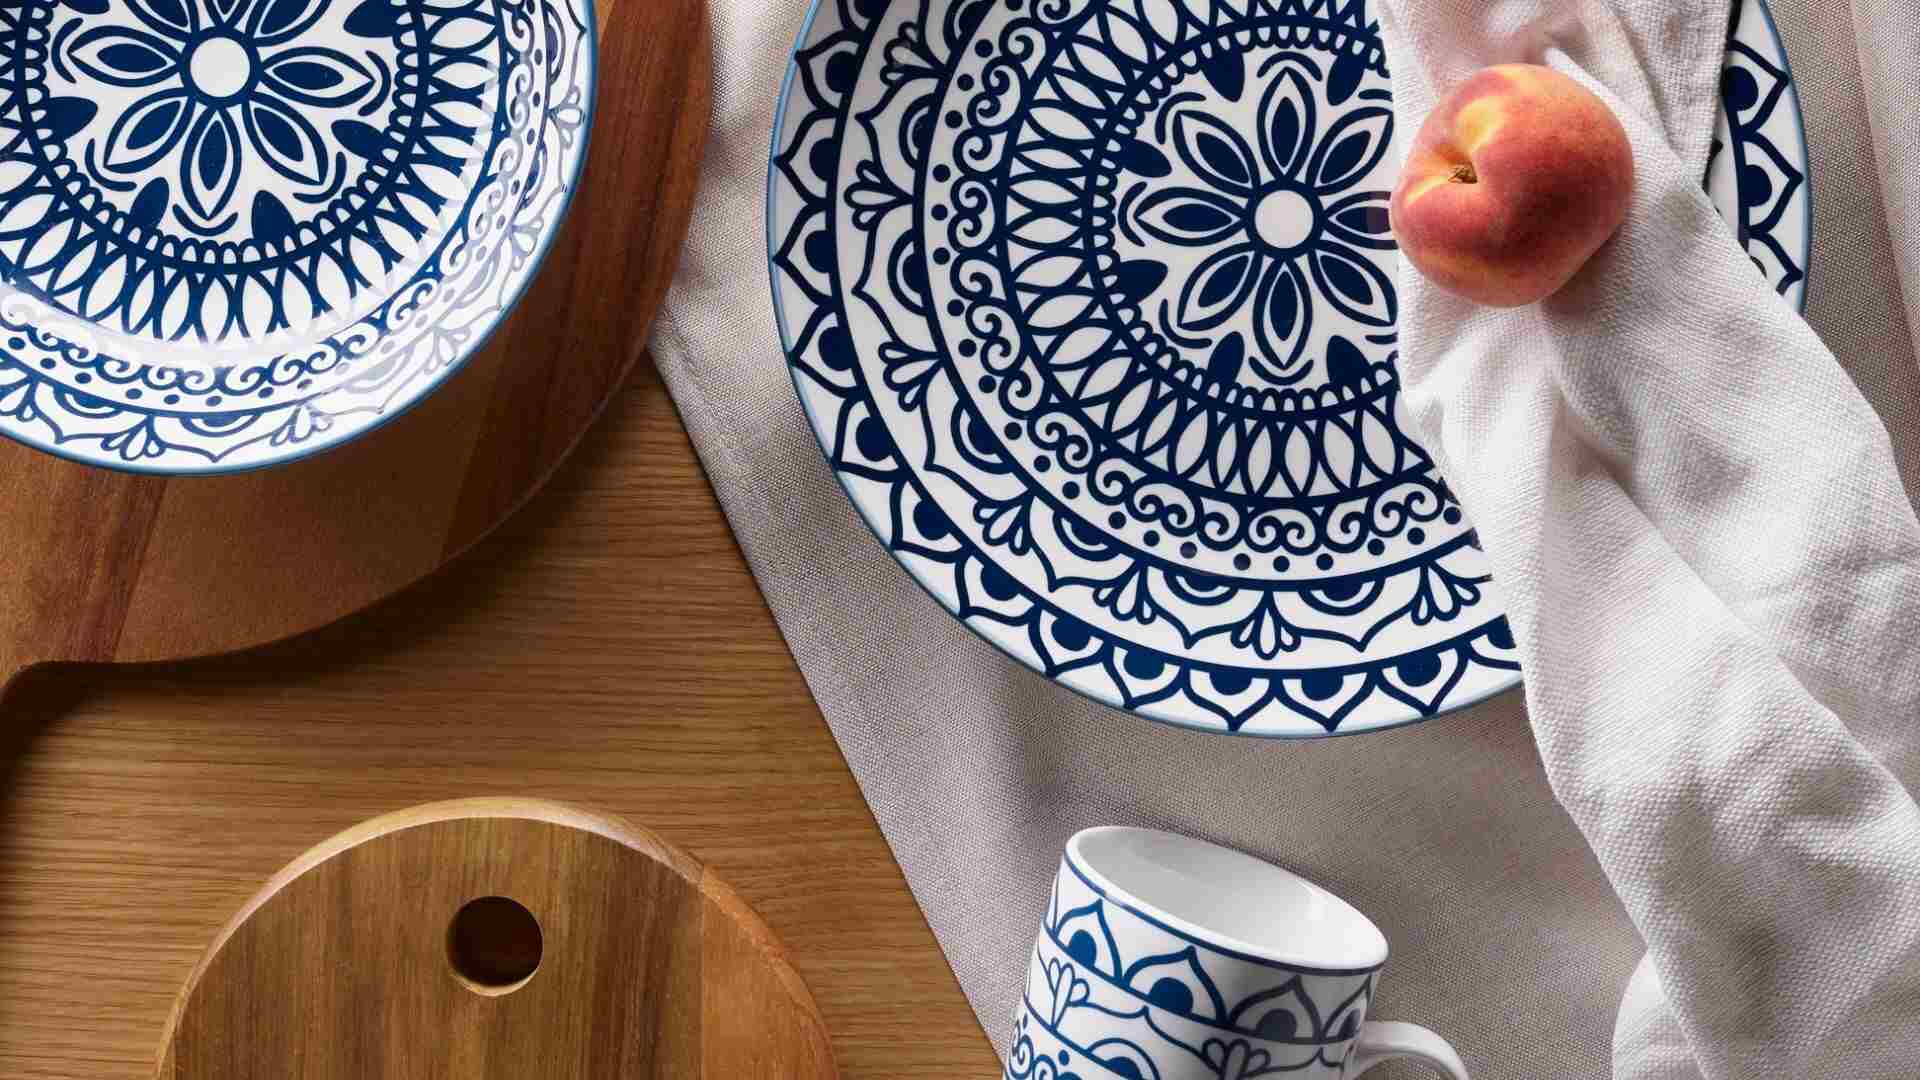 How To Care For Your Bowl And Plate Sets